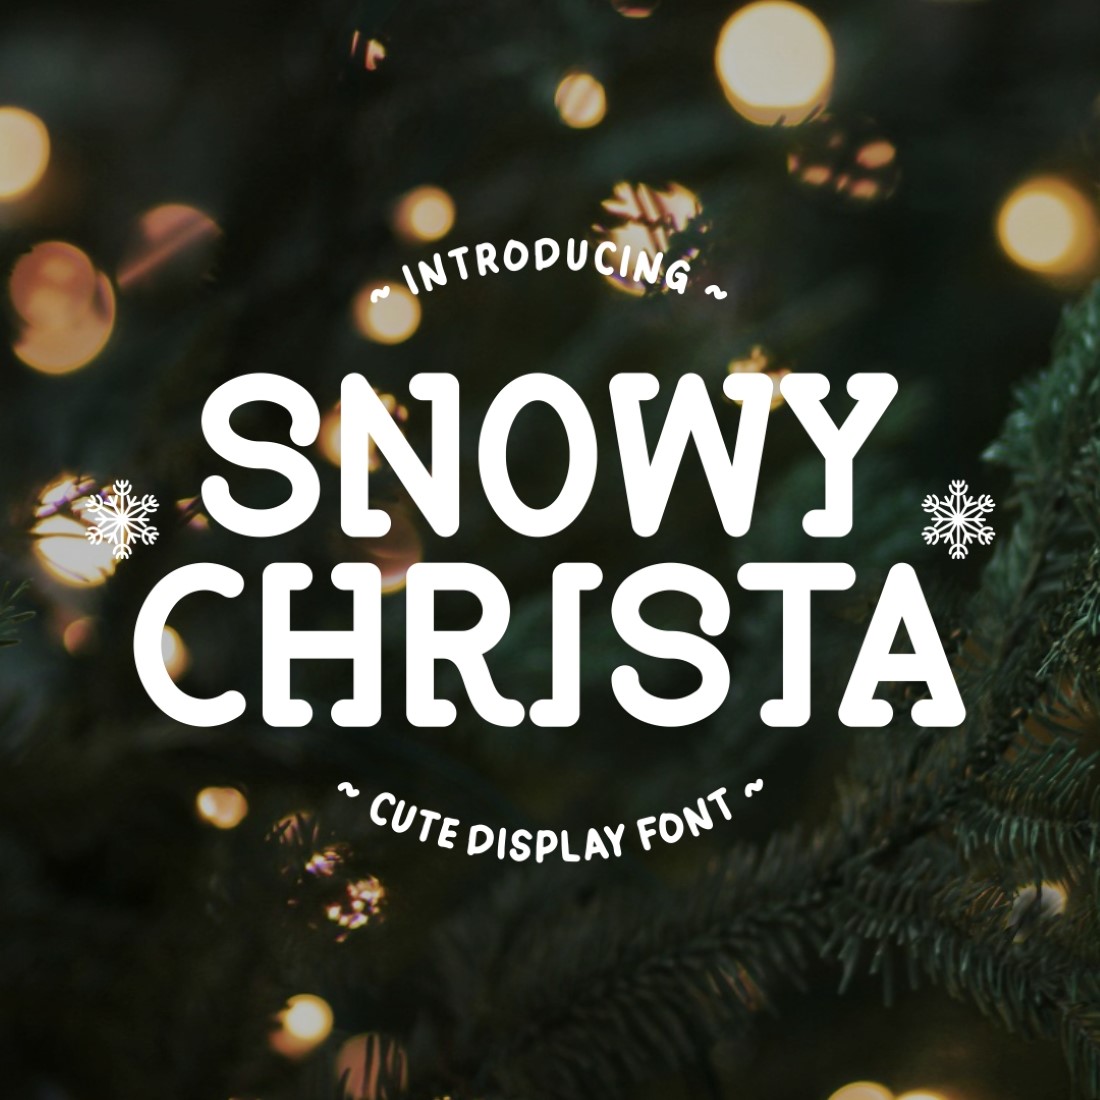 Snowy Christa - Cute Display Font cover image.